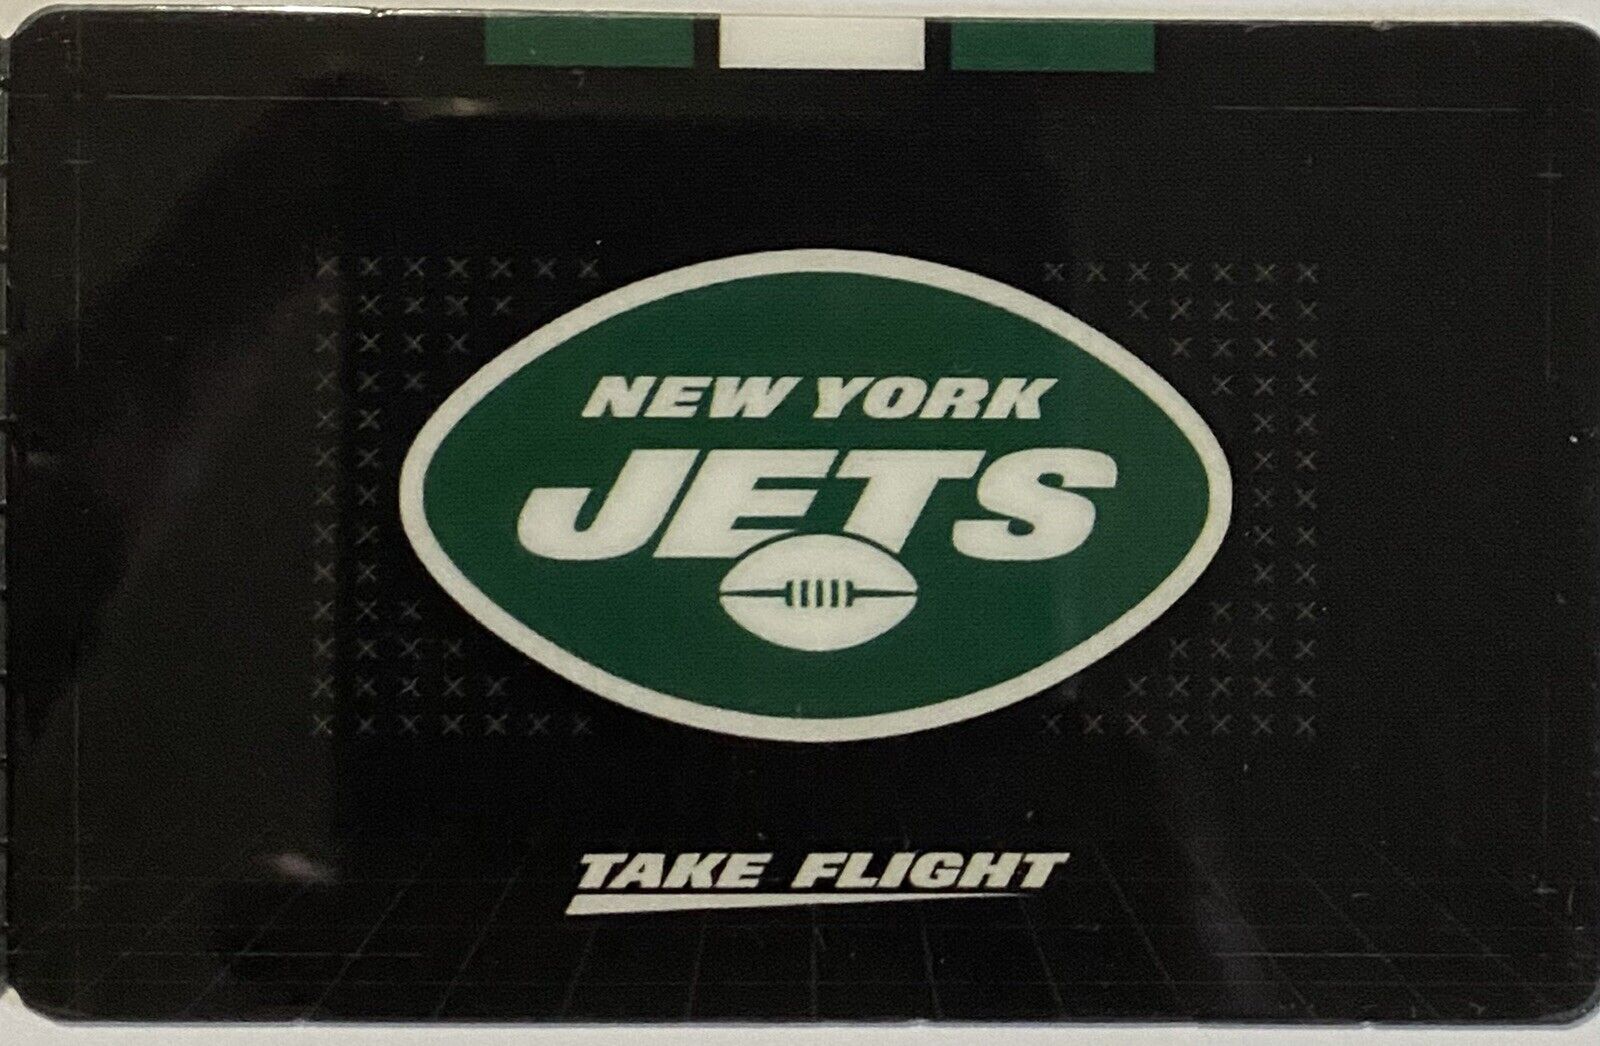 2022 New York Jets Schedule 🏈 Cool Nfl Football Sked 🏈 Plastic Key Tags ‼️